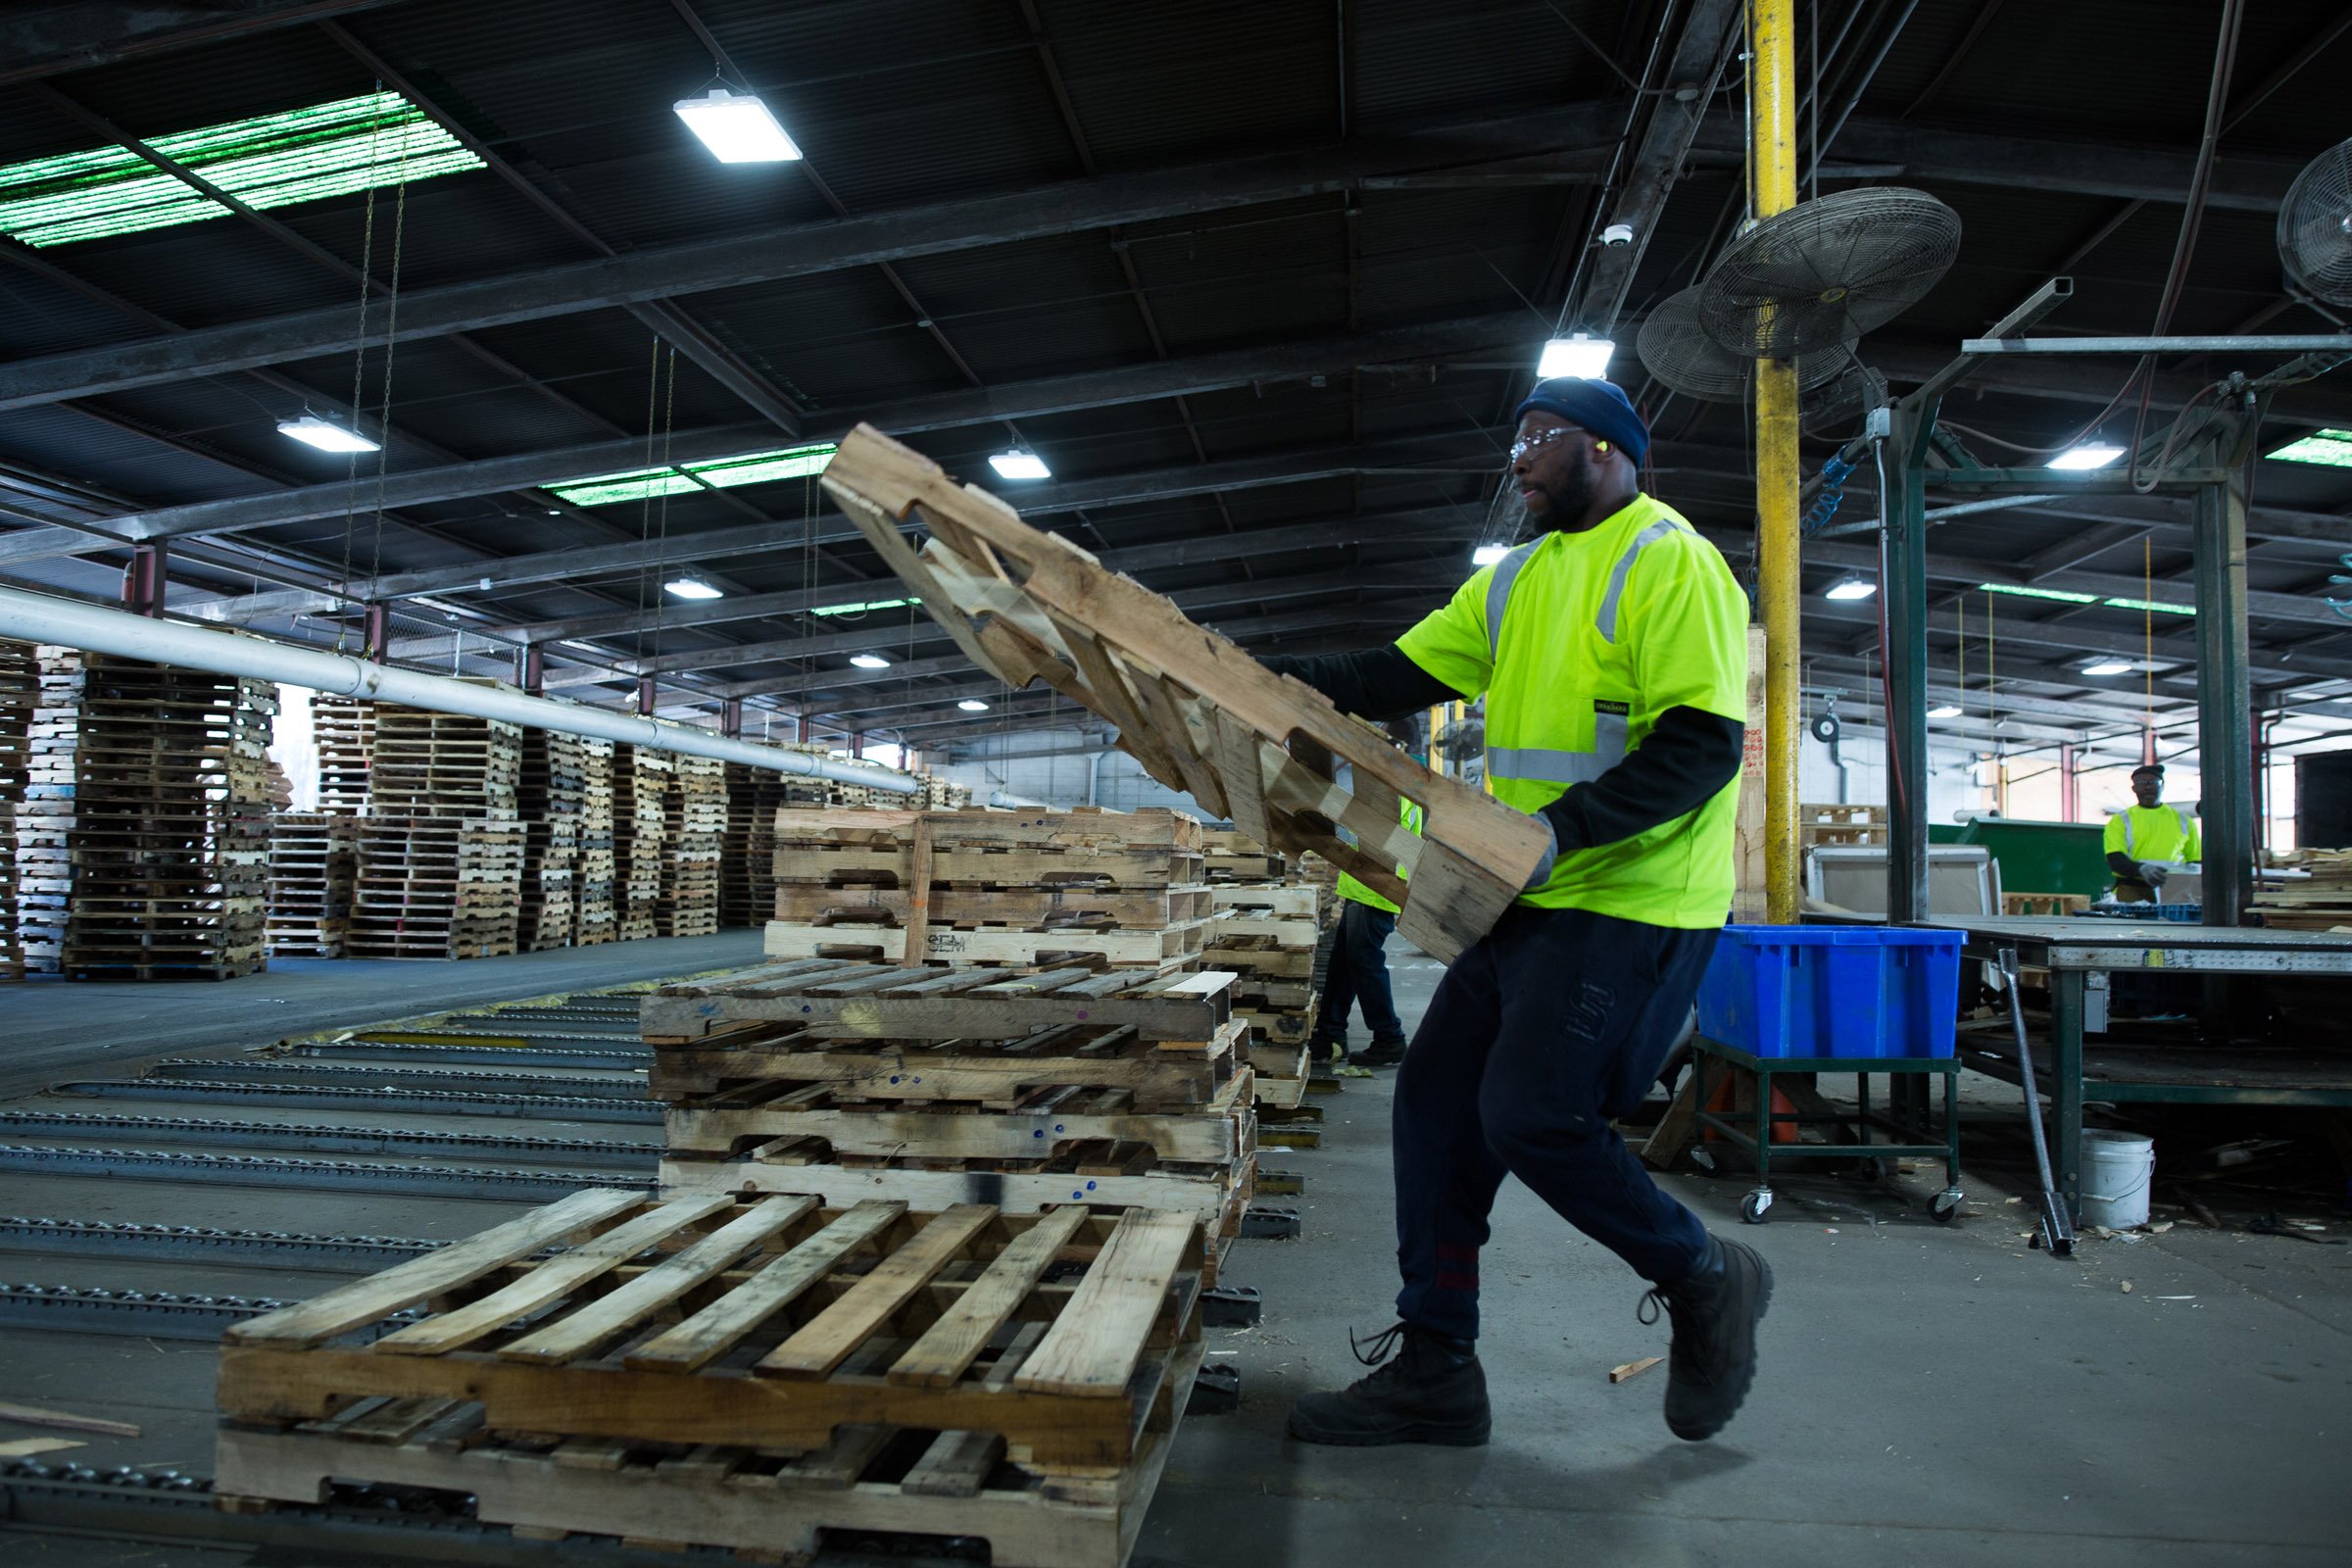 A man placing a pallet on a stack of pallets